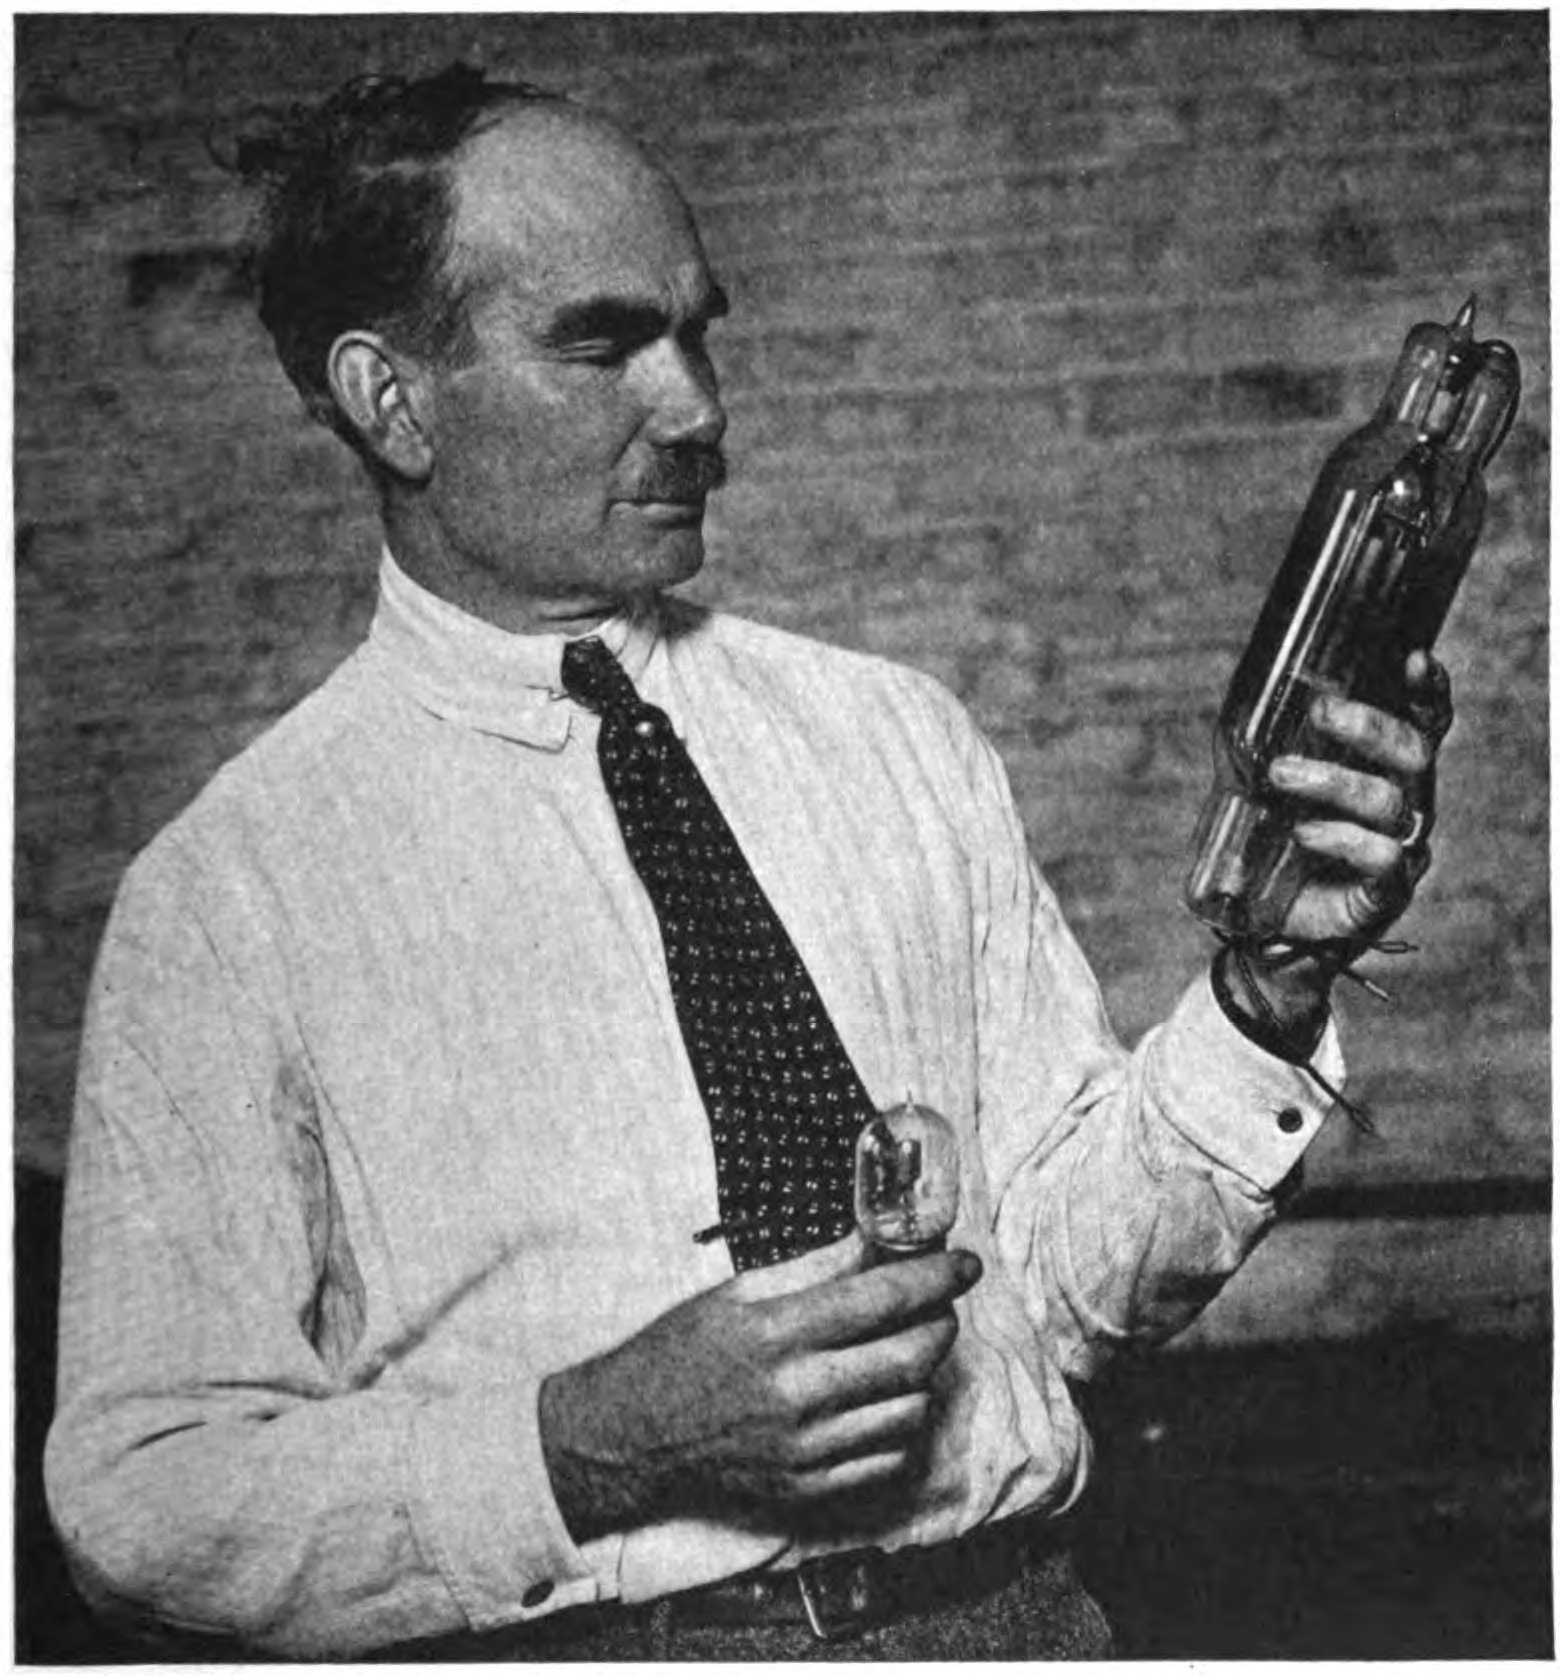 Lee De Forest with Audion tubes. https://commons.wikimedia.org/wiki/File:Lee_De_Forest_with_Audion_tubes.jpg